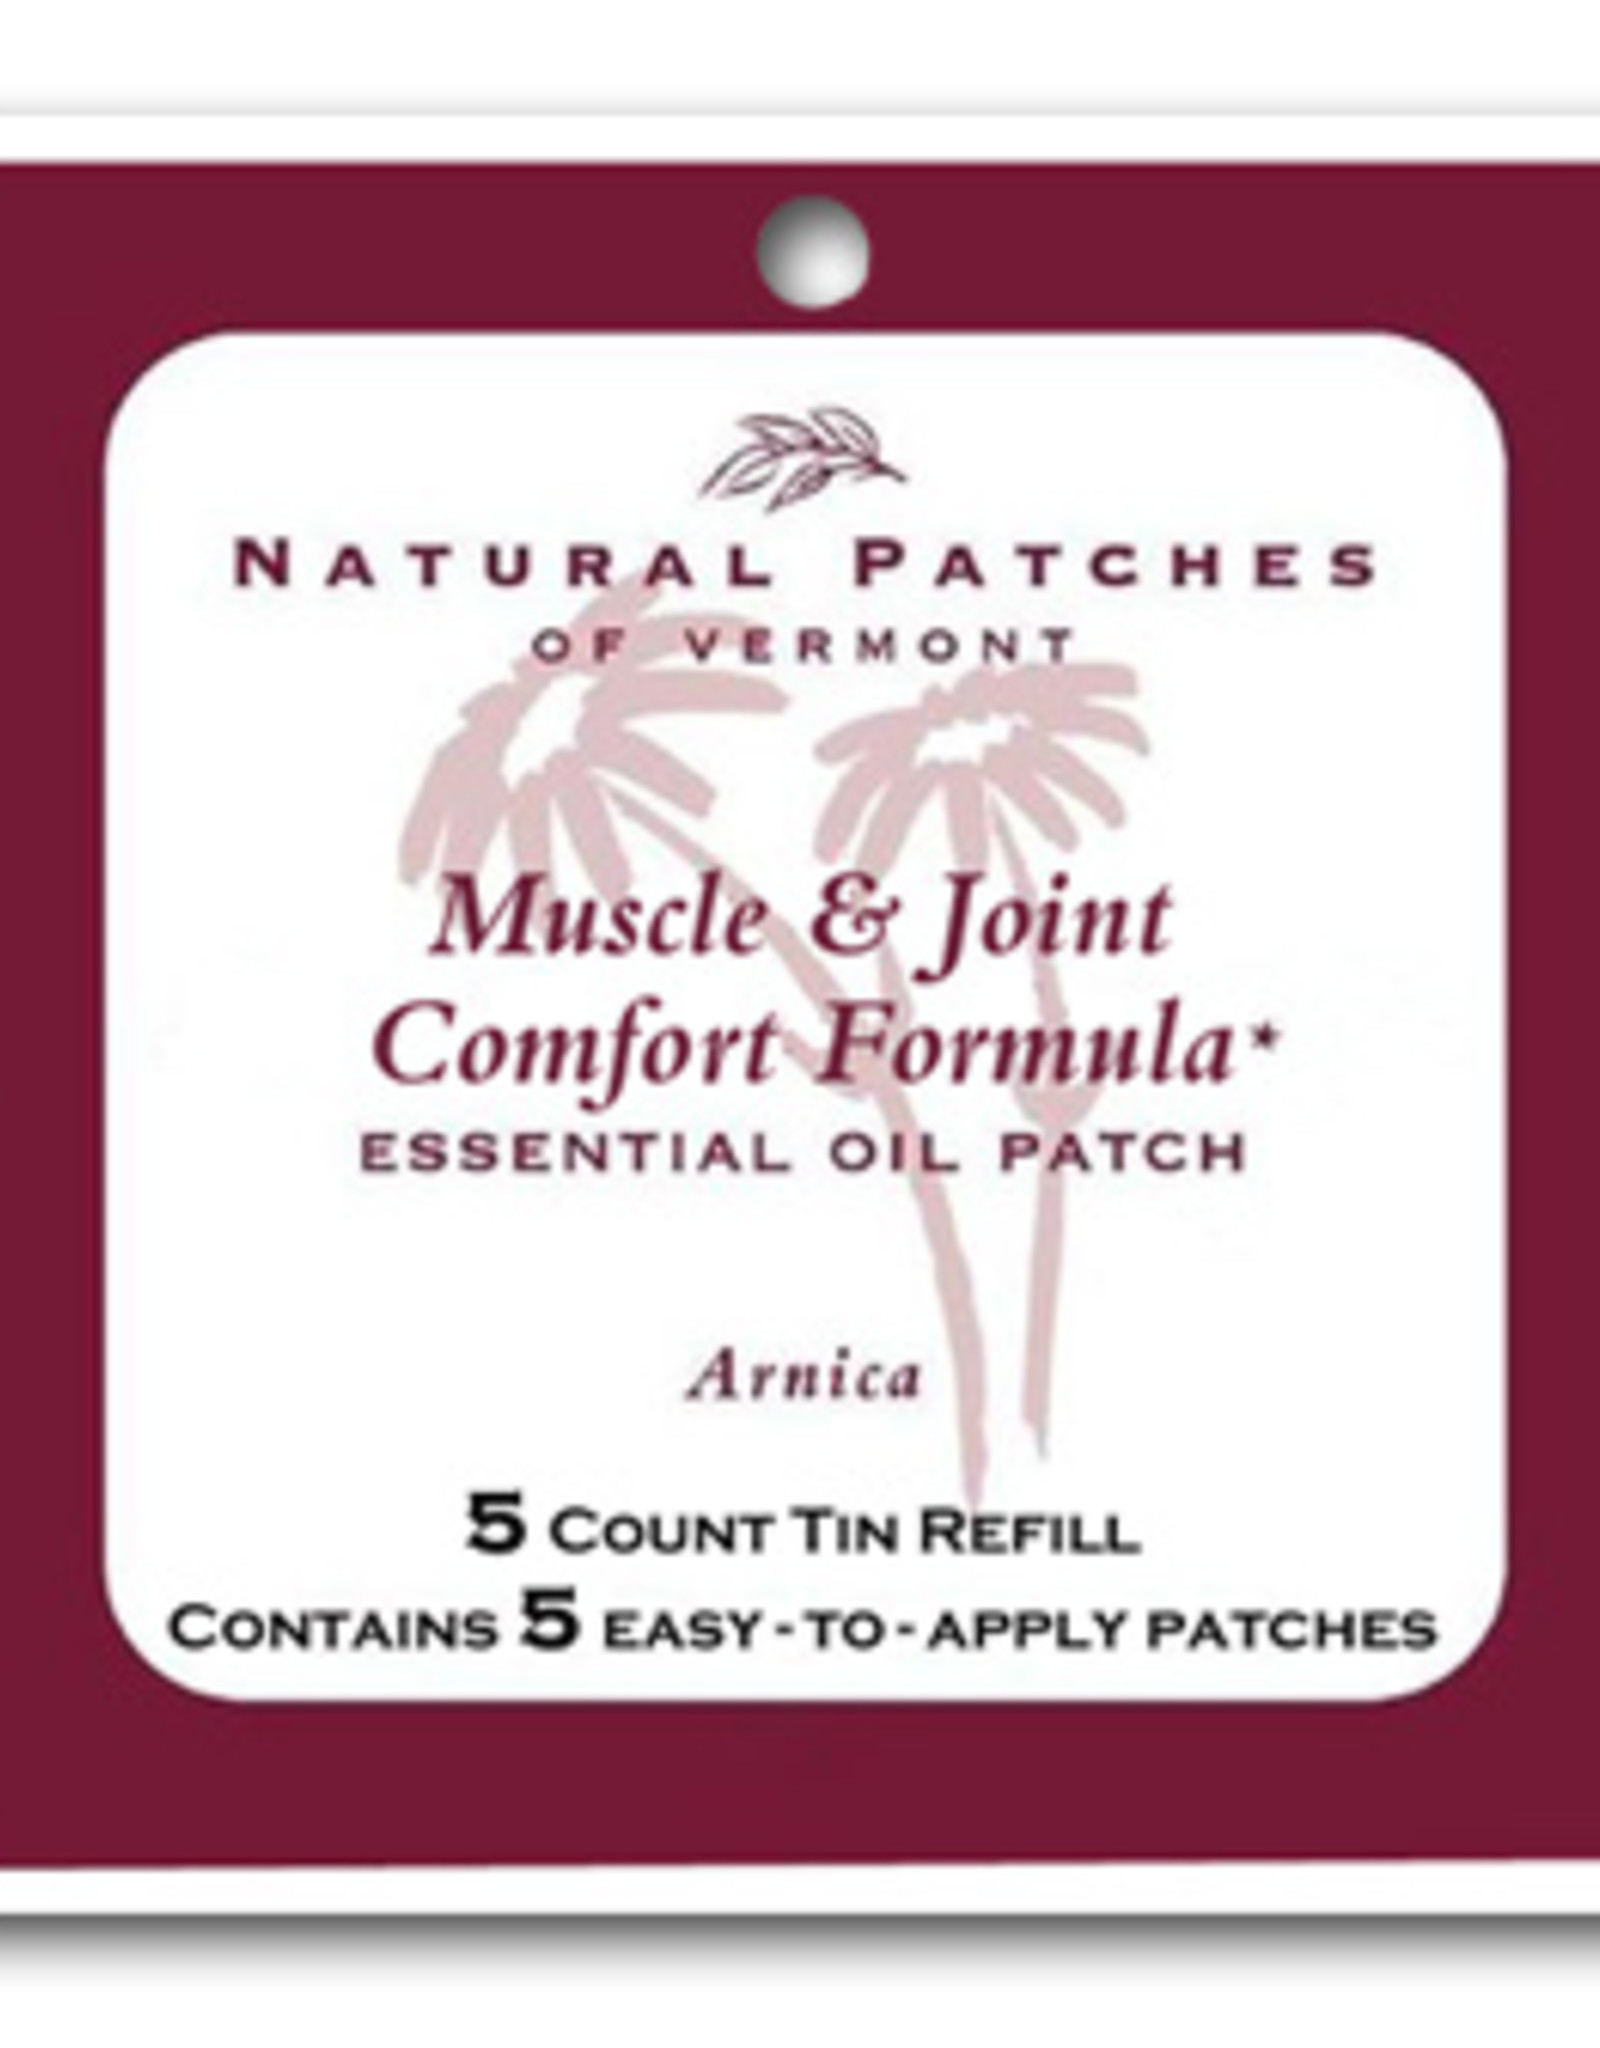 Natural Patches of Vermont Muscle & Joint Comfort Formula